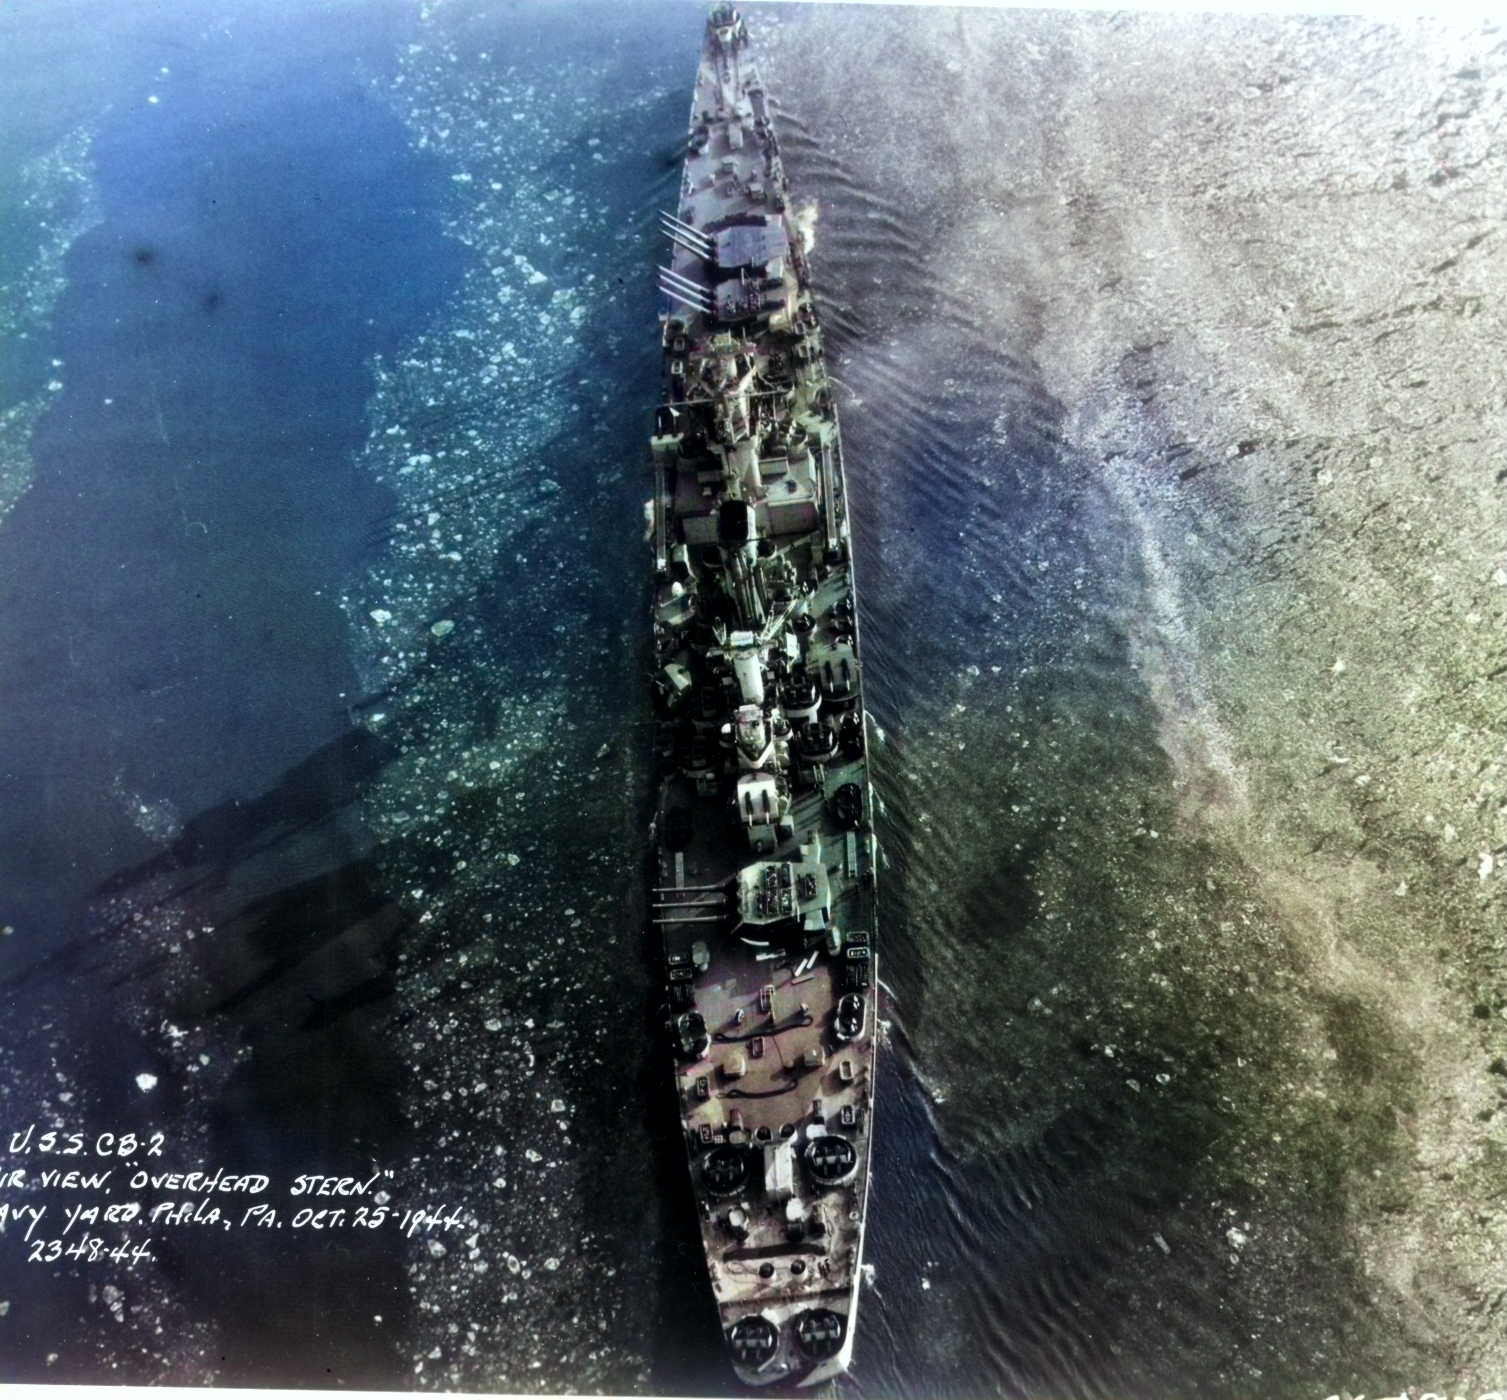 Aerial view of large cruiser Guam, Philadelphia Navy Yard, Pennsylvania, United States, 25 Oct 1944, photo 5 of 5 [Colorized by WW2DB]